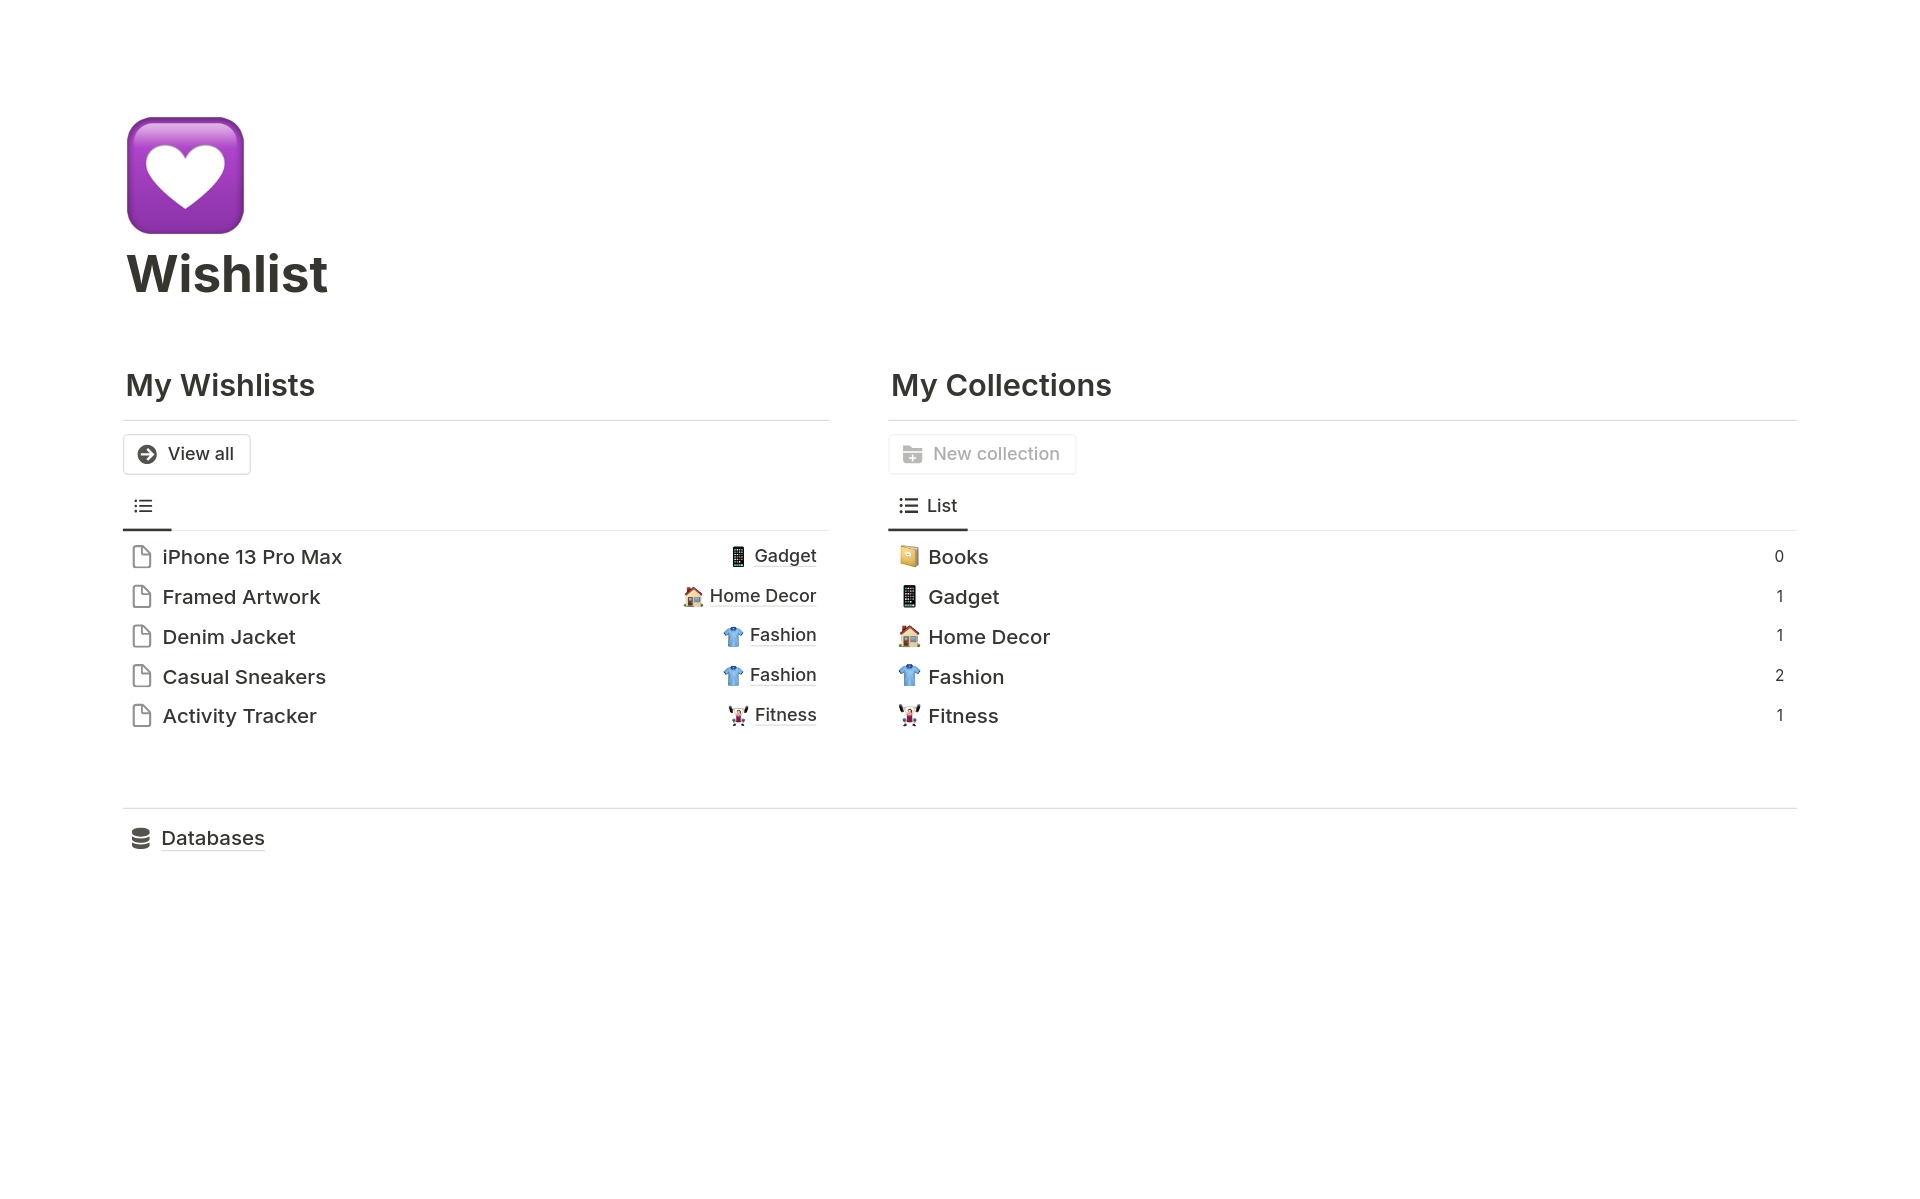 Easily manage your wishlist with the Wishlist Notion Template, which provides customizable collections to categorize all your desired items in one place.